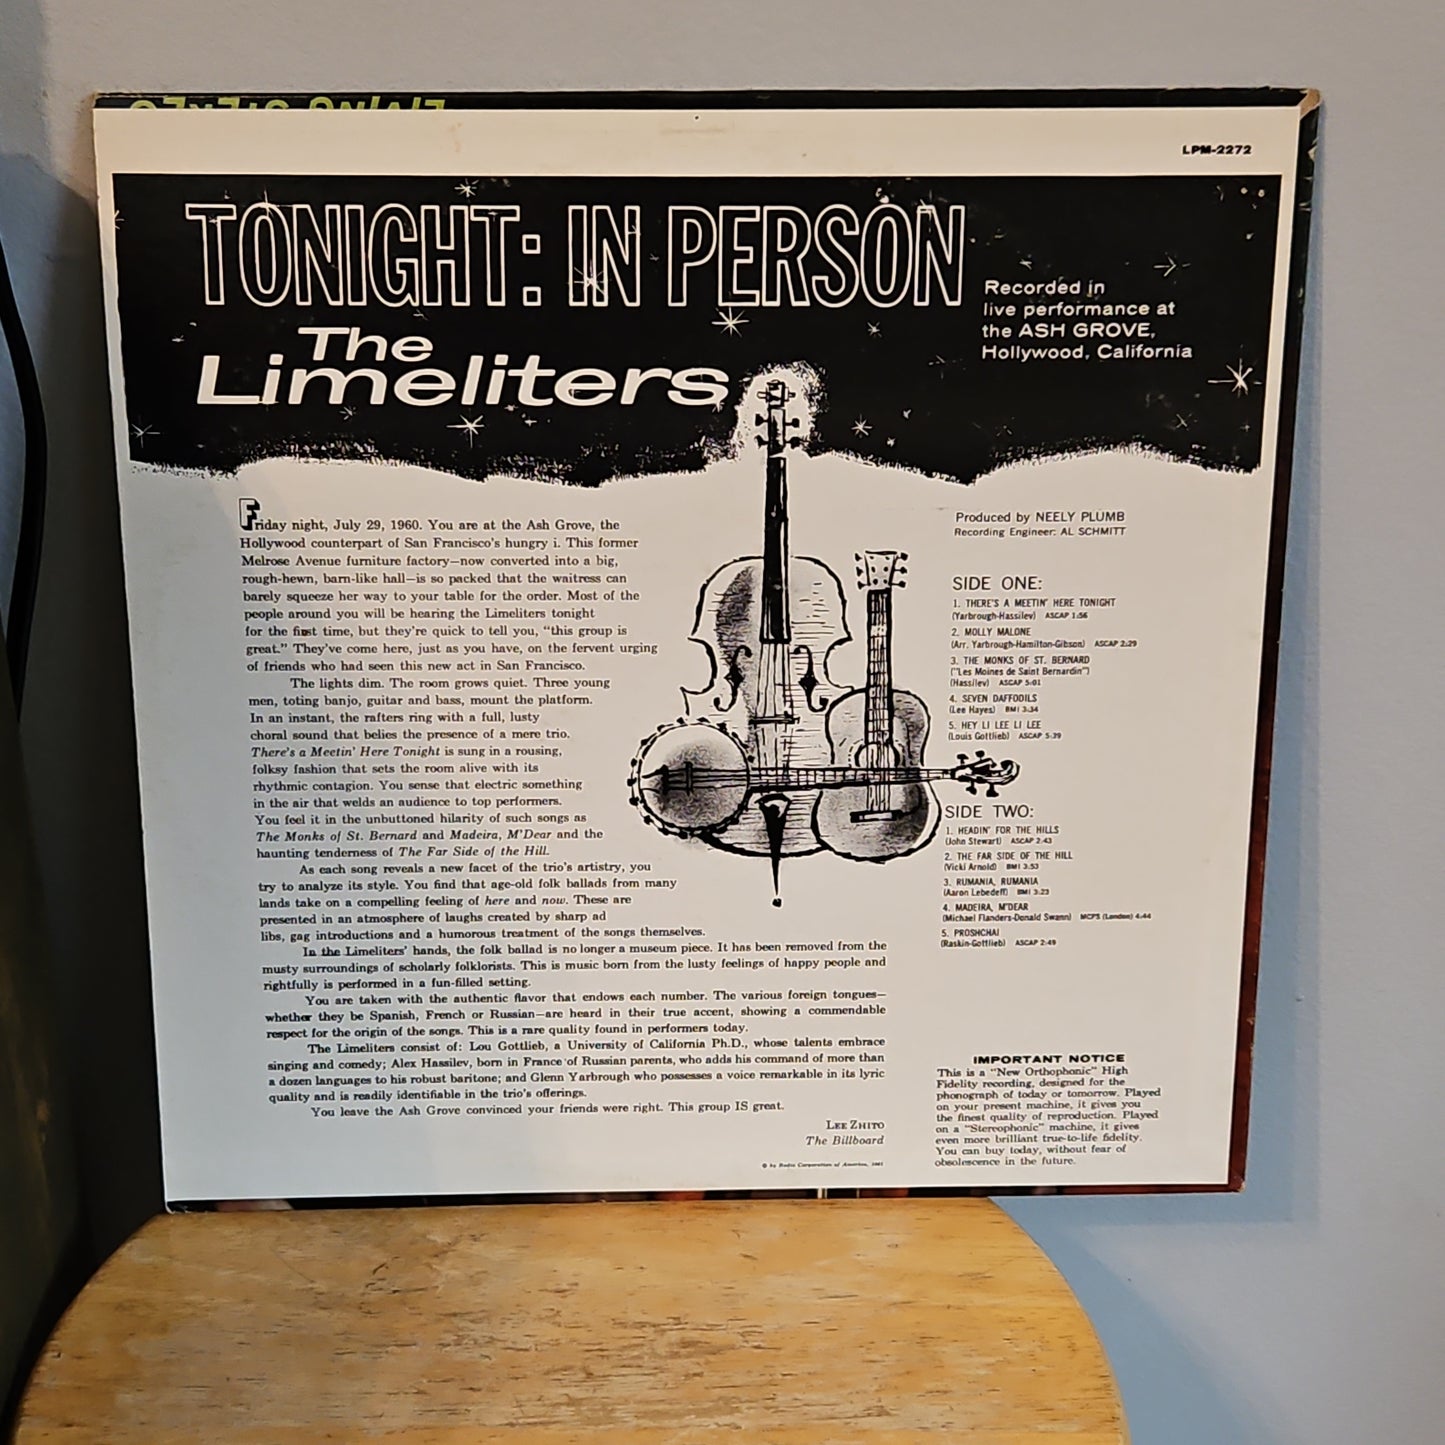 The Limeliters Tonight: In Person By RCA Victor Records